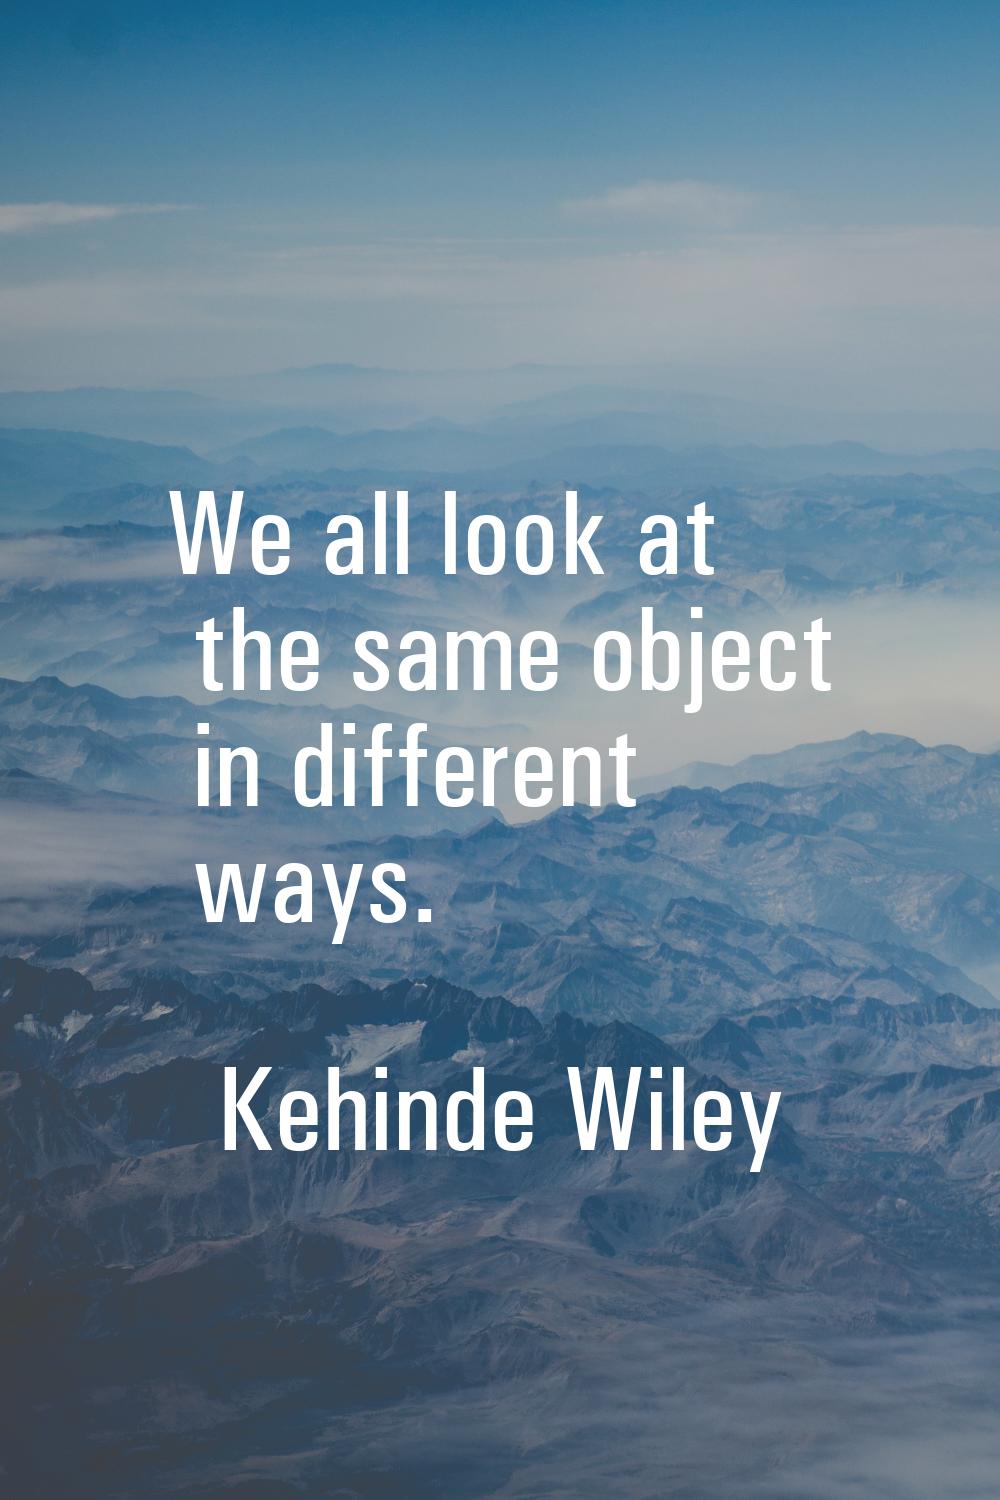 We all look at the same object in different ways.